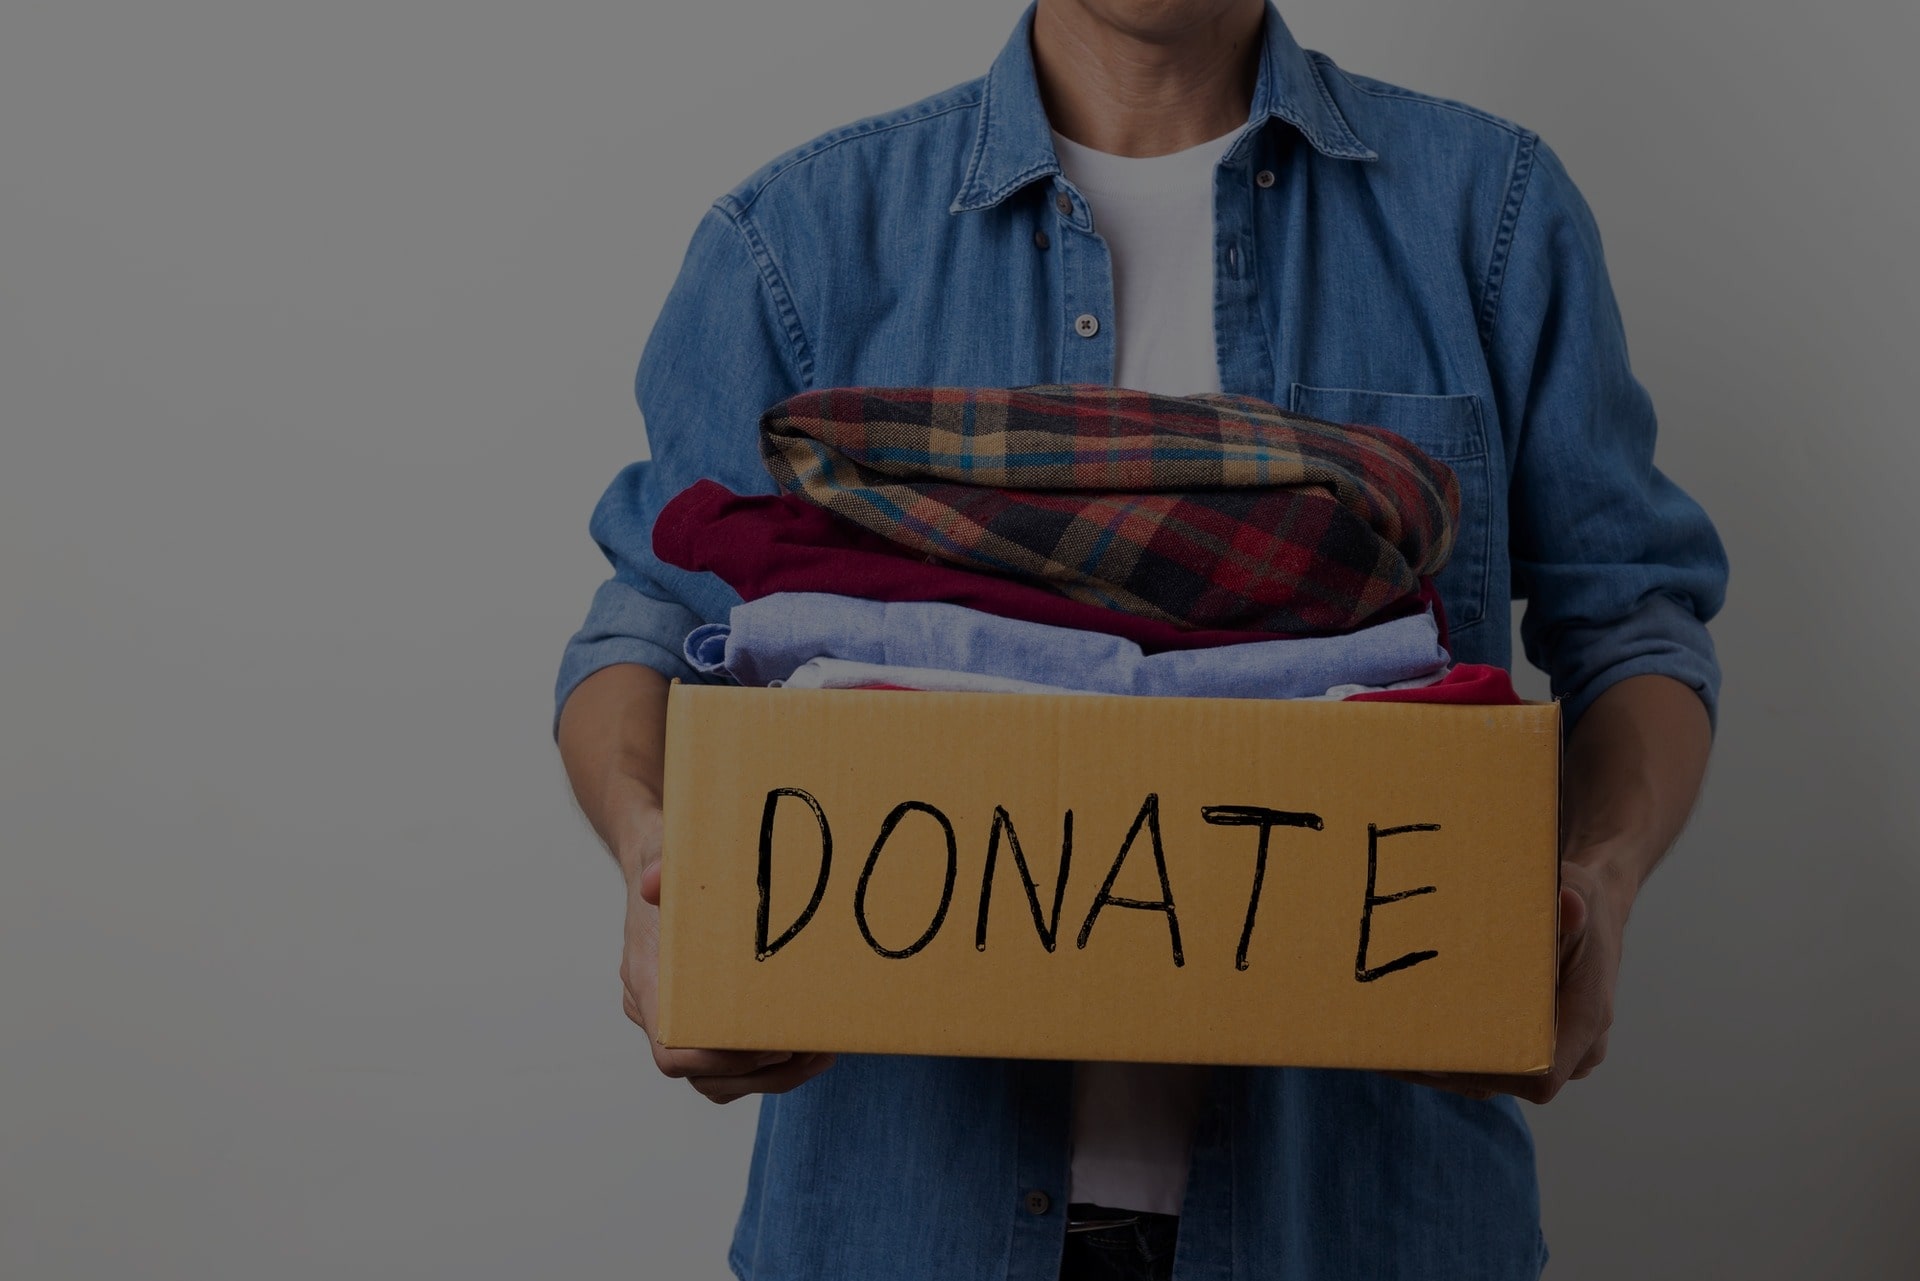 Where Can You Donate Junk You Don’t Need?